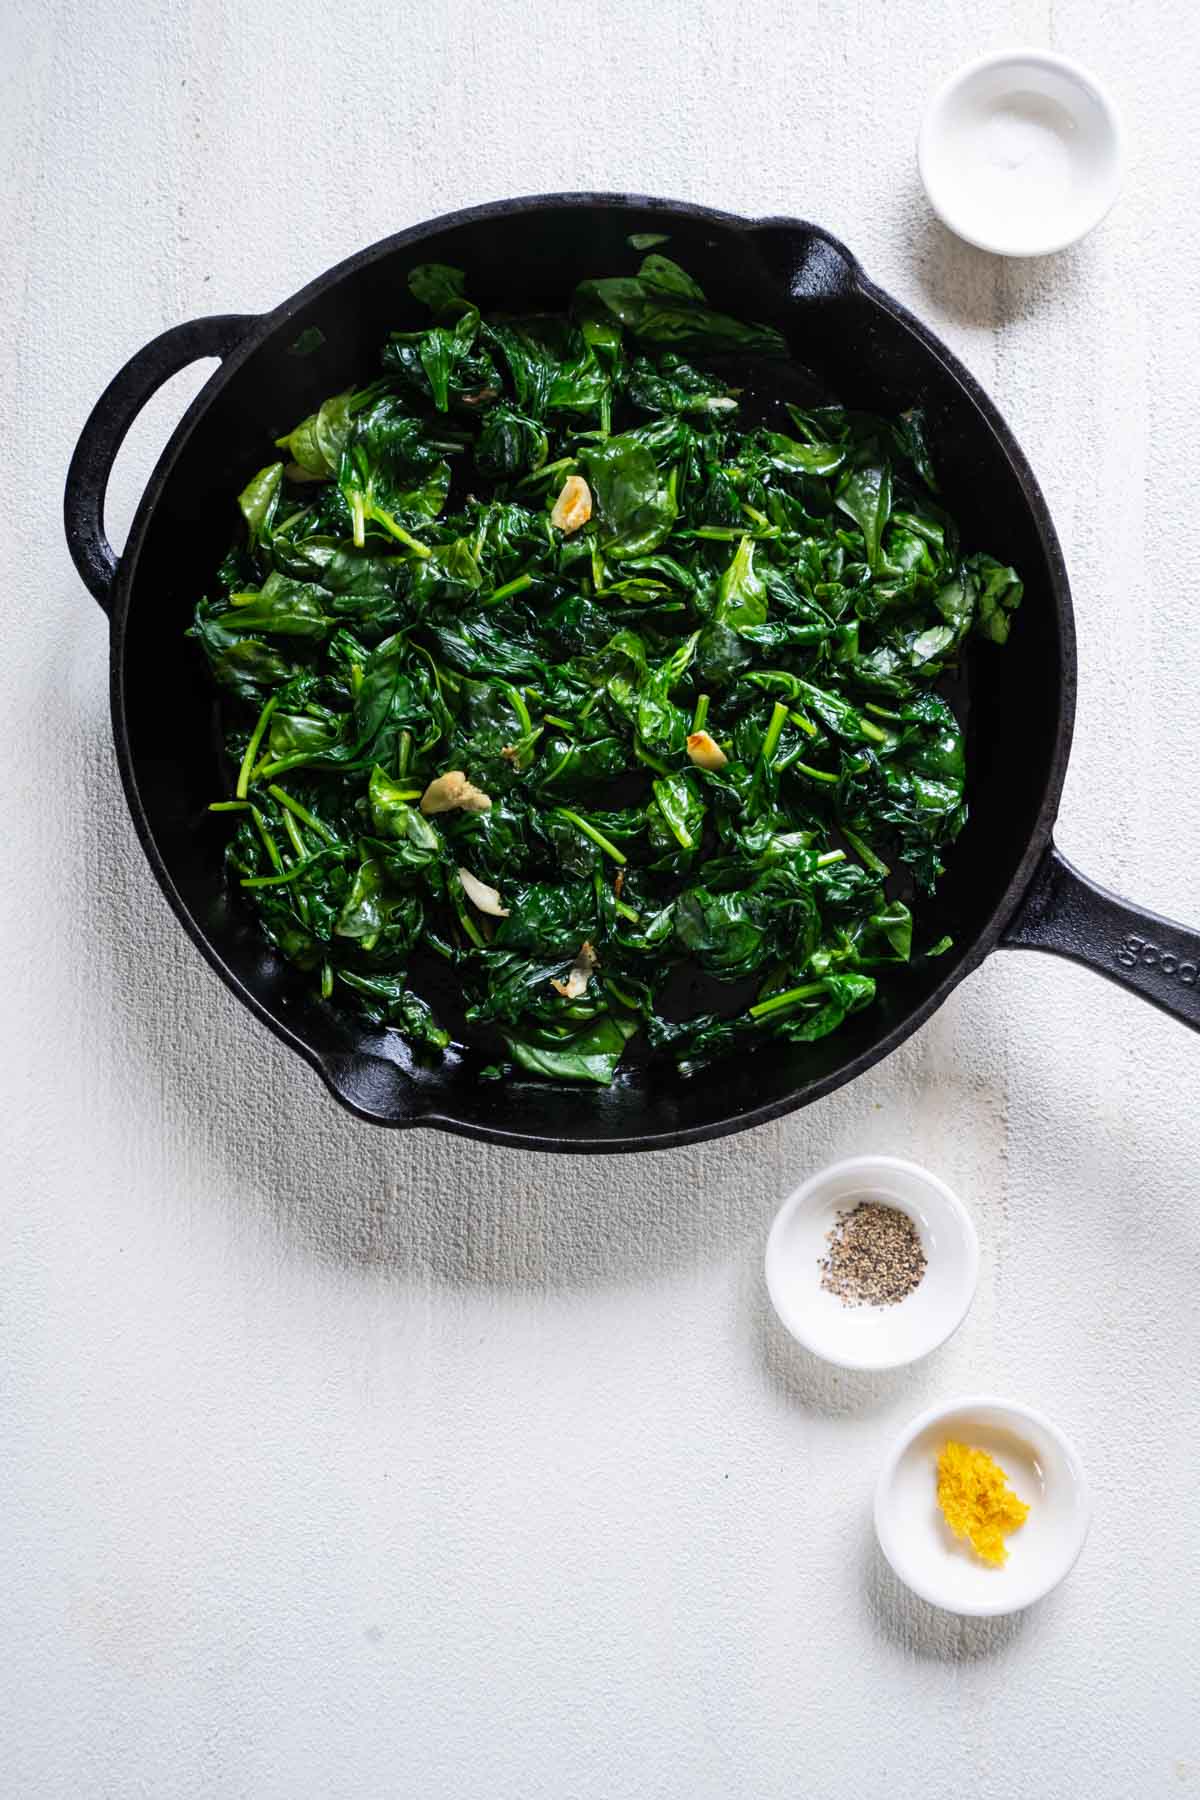 Sauteed spinach with smashed garlic cloves in skillet.